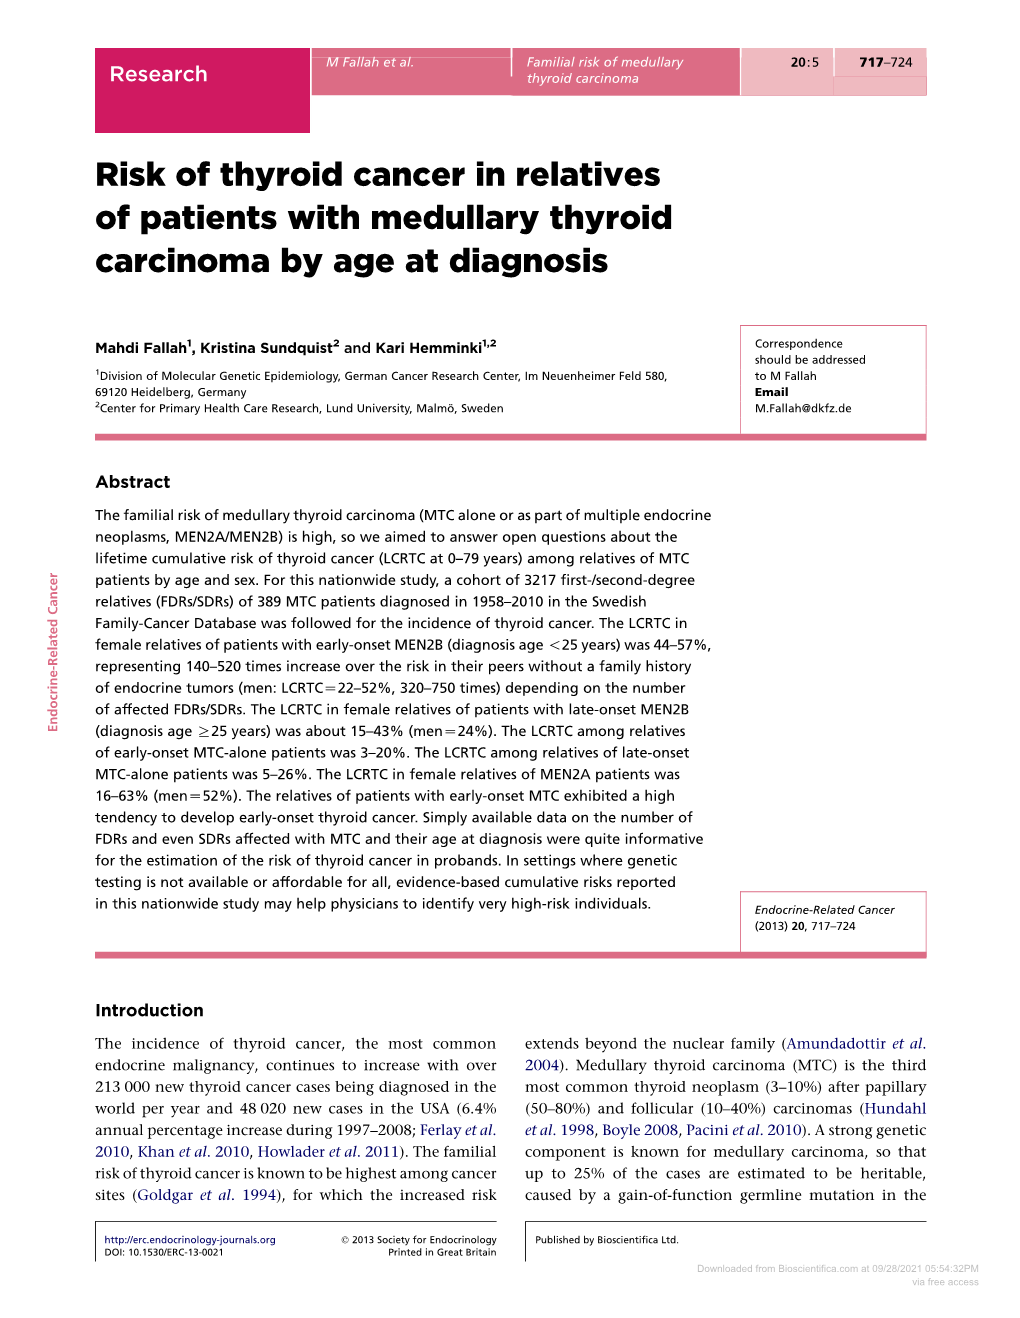 Risk of Thyroid Cancer in Relatives of Patients with Medullary Thyroid Carcinoma by Age at Diagnosis